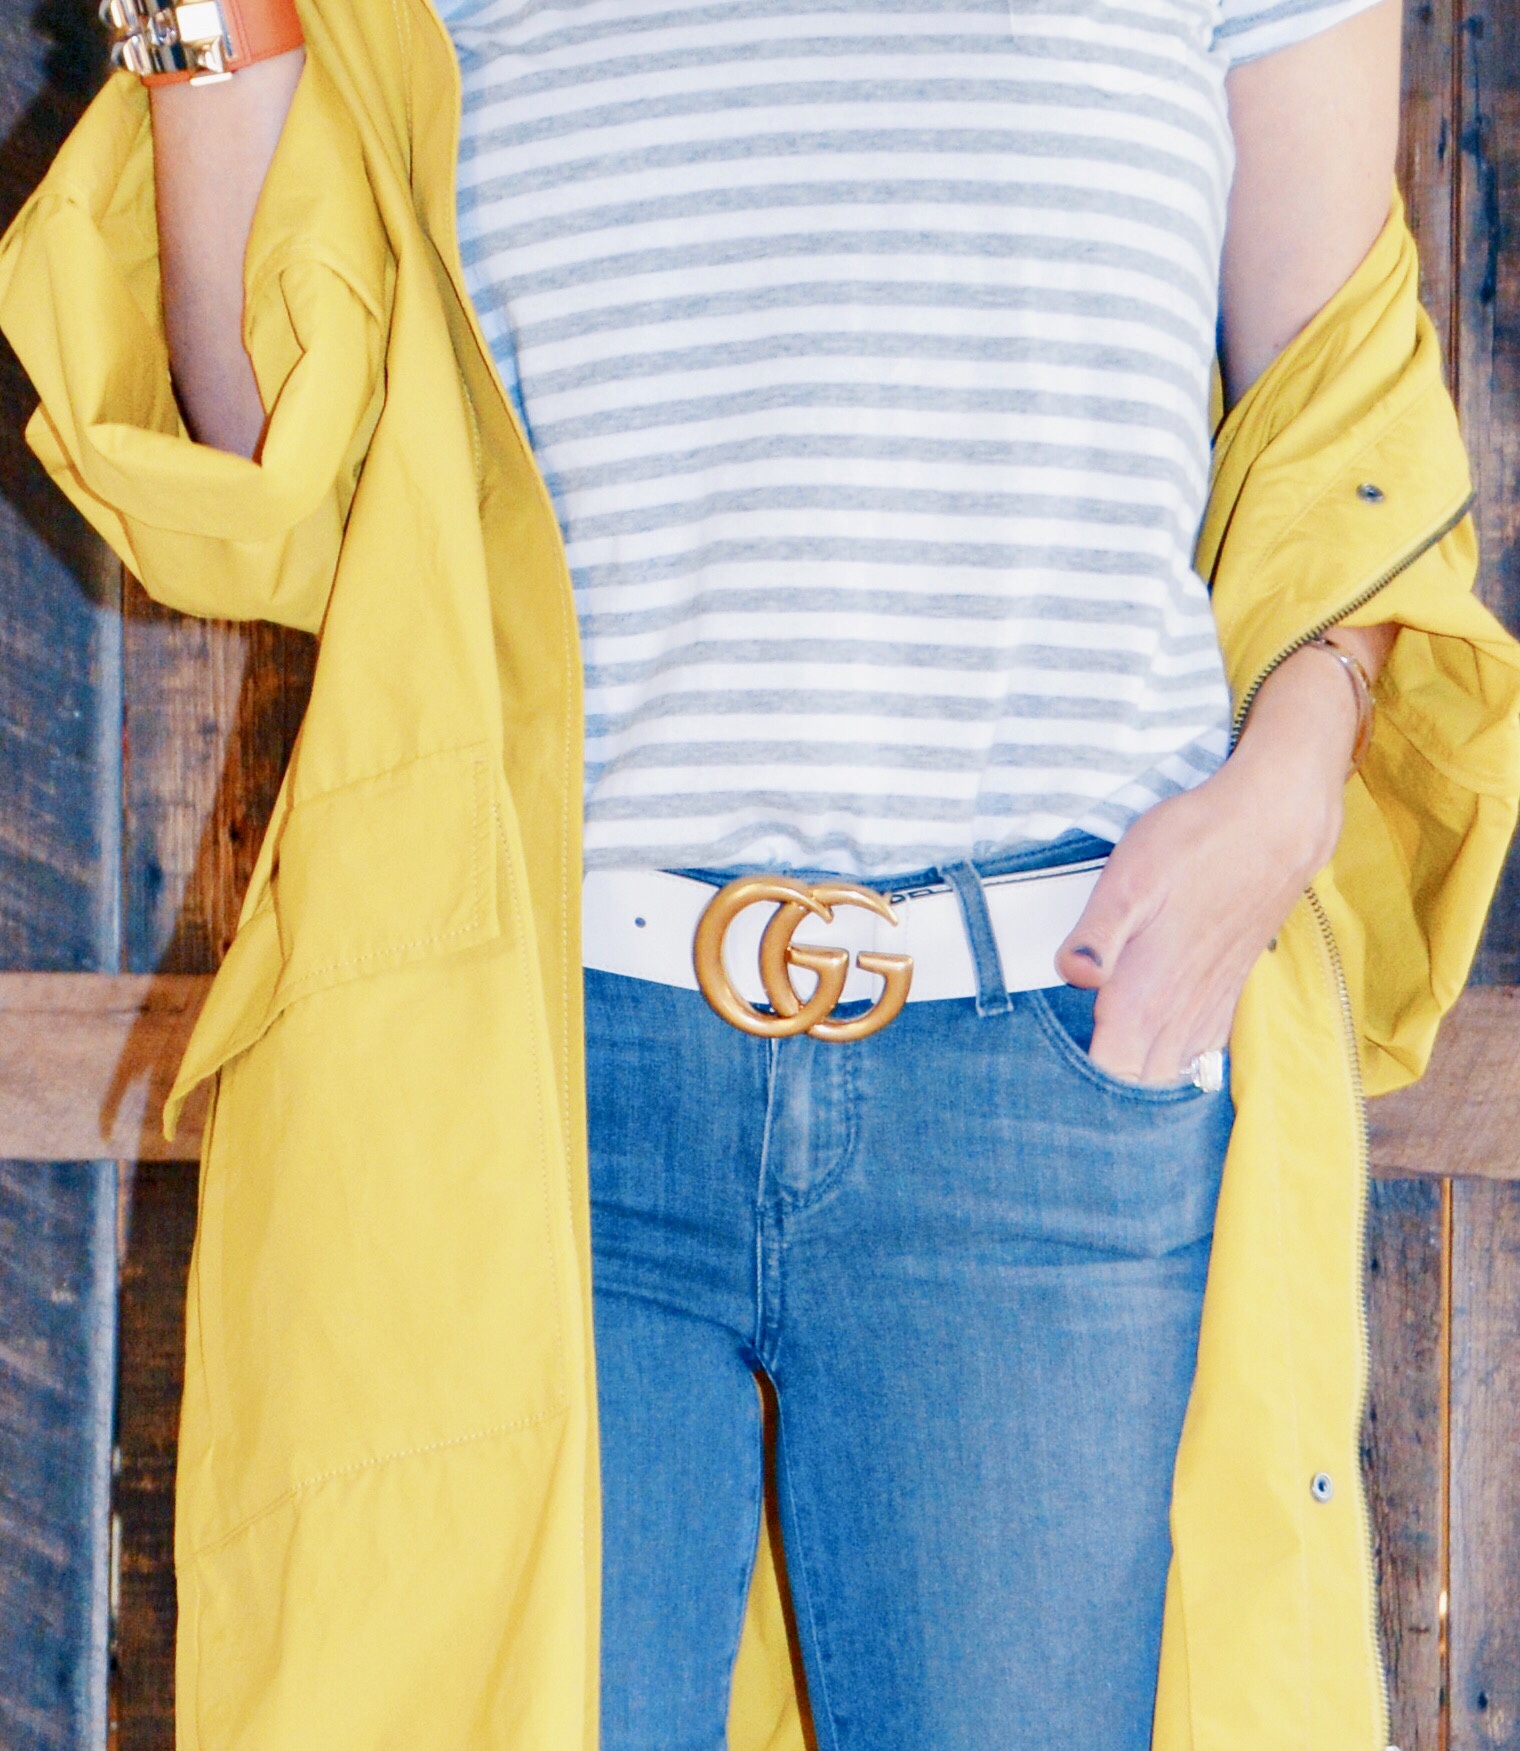 raincoats paired with a wide white belt